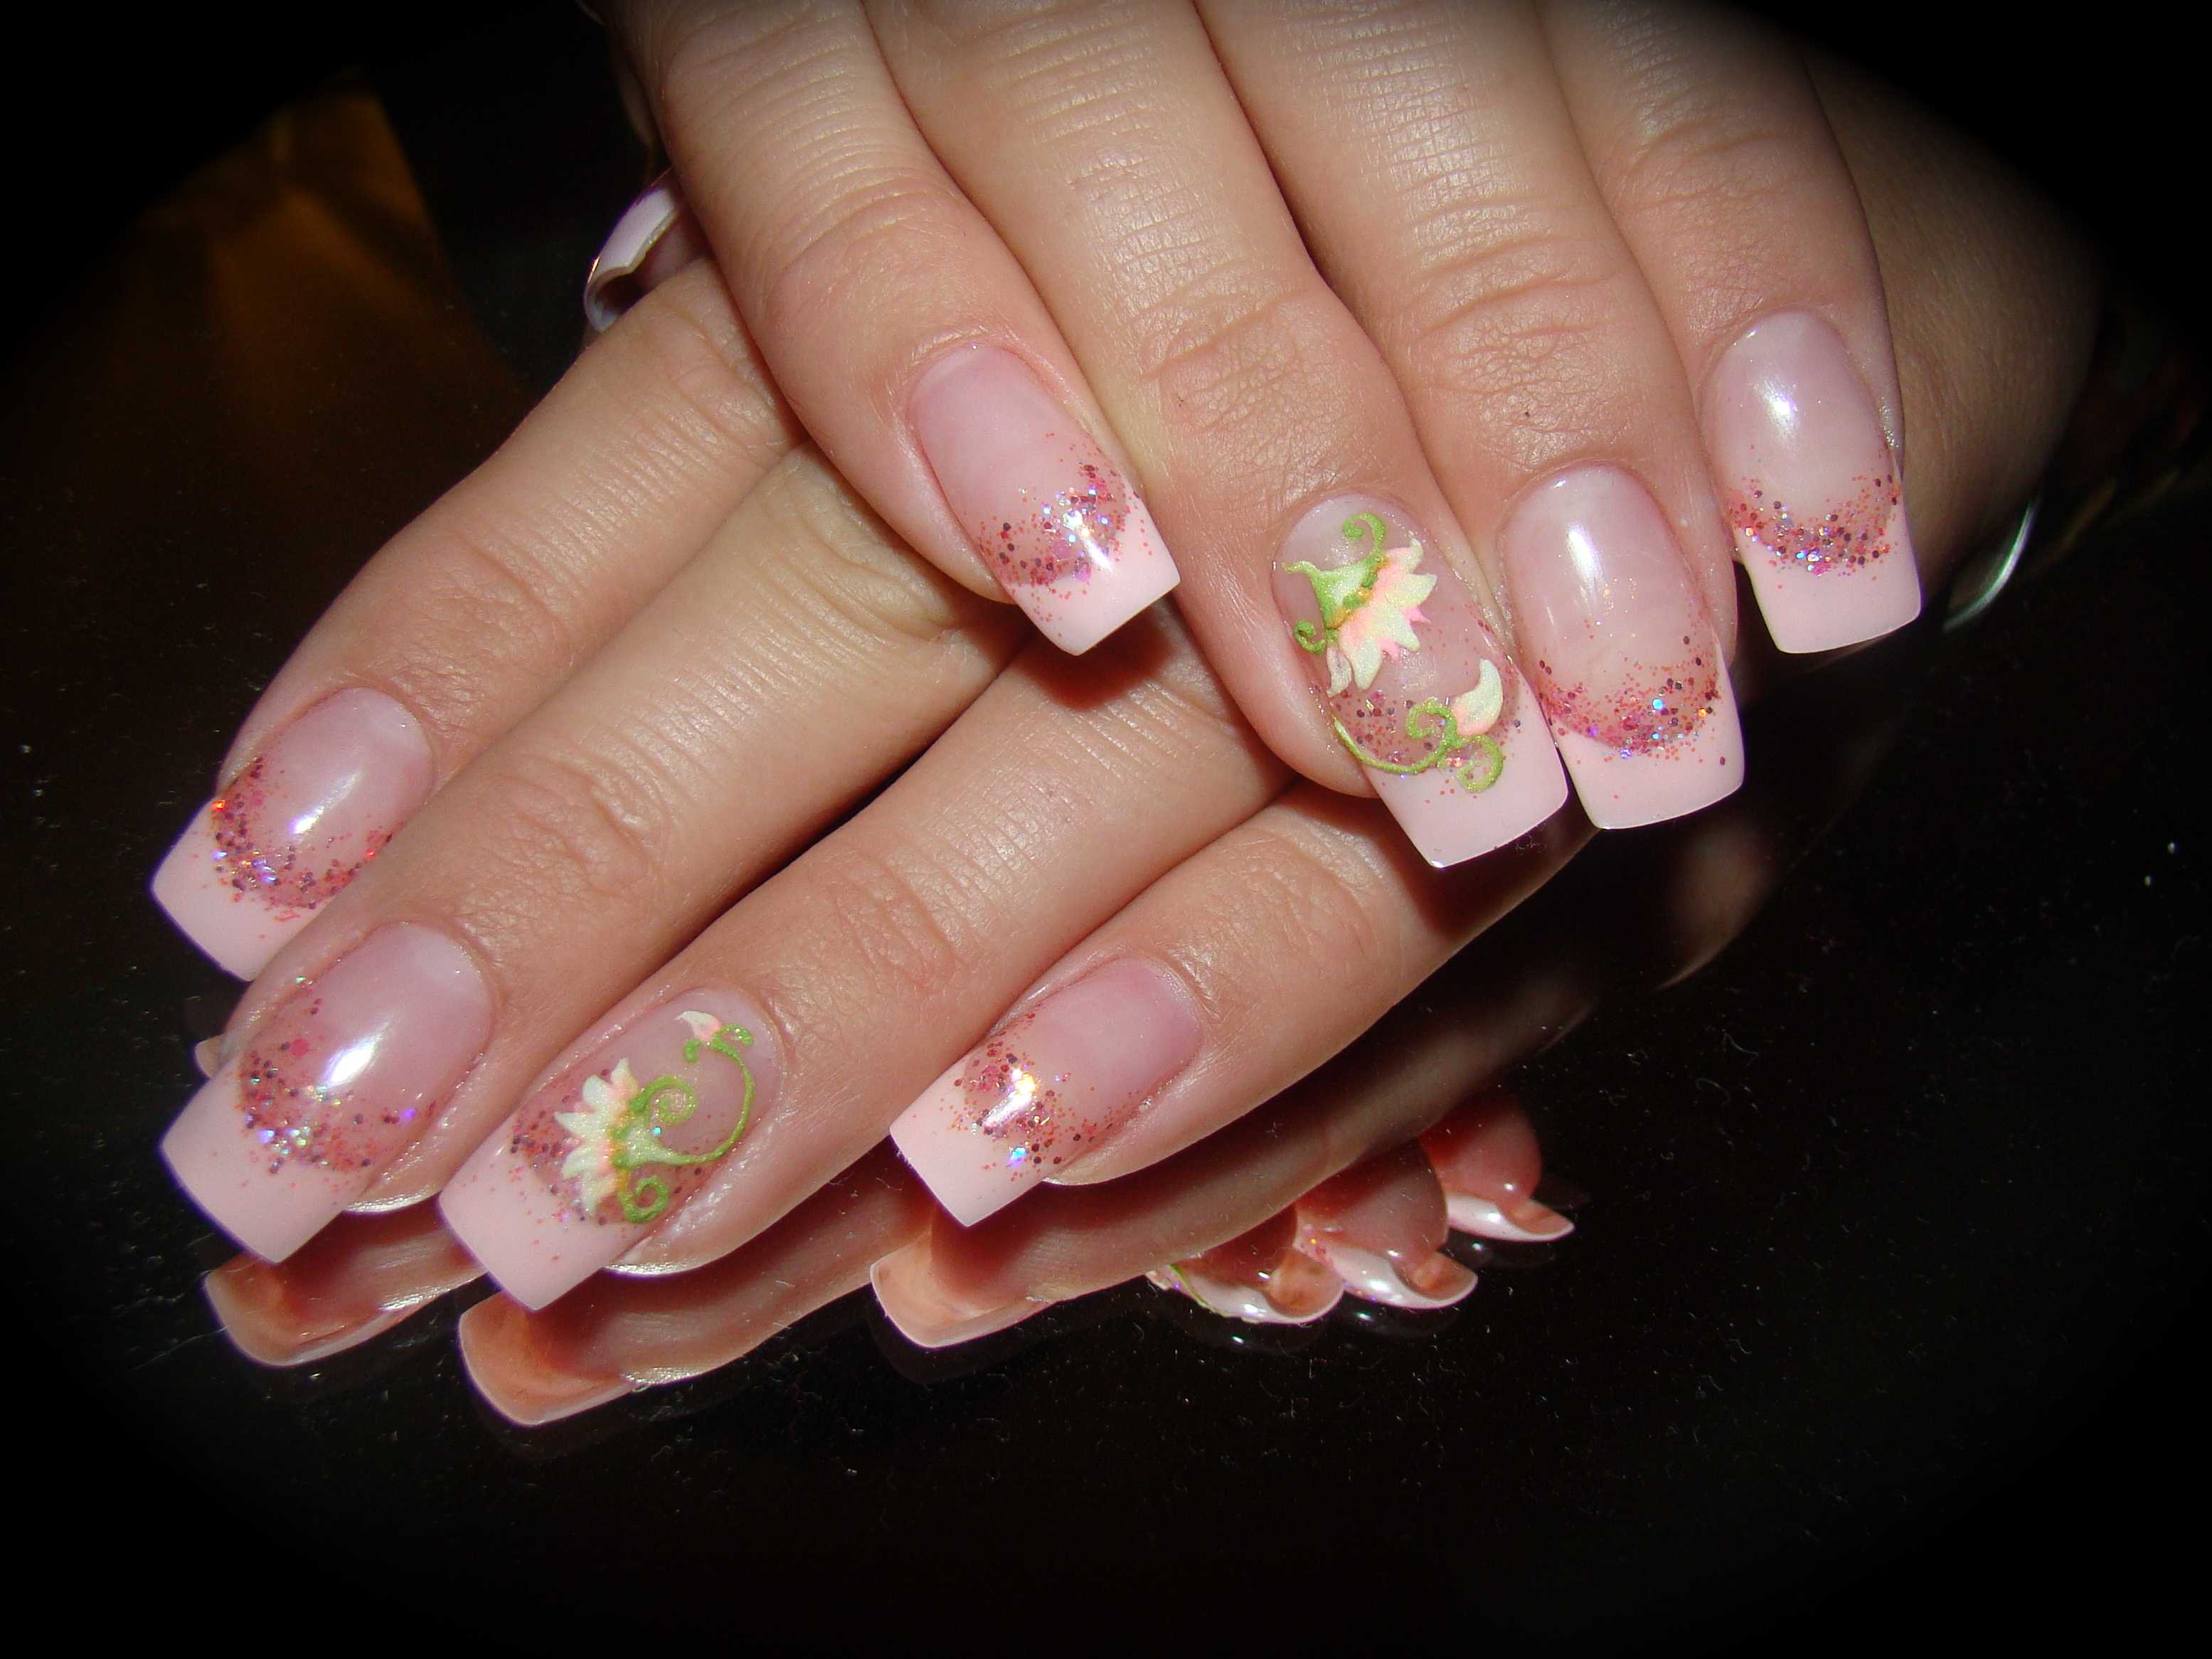 3. Floral Acrylic Nail Design - wide 5